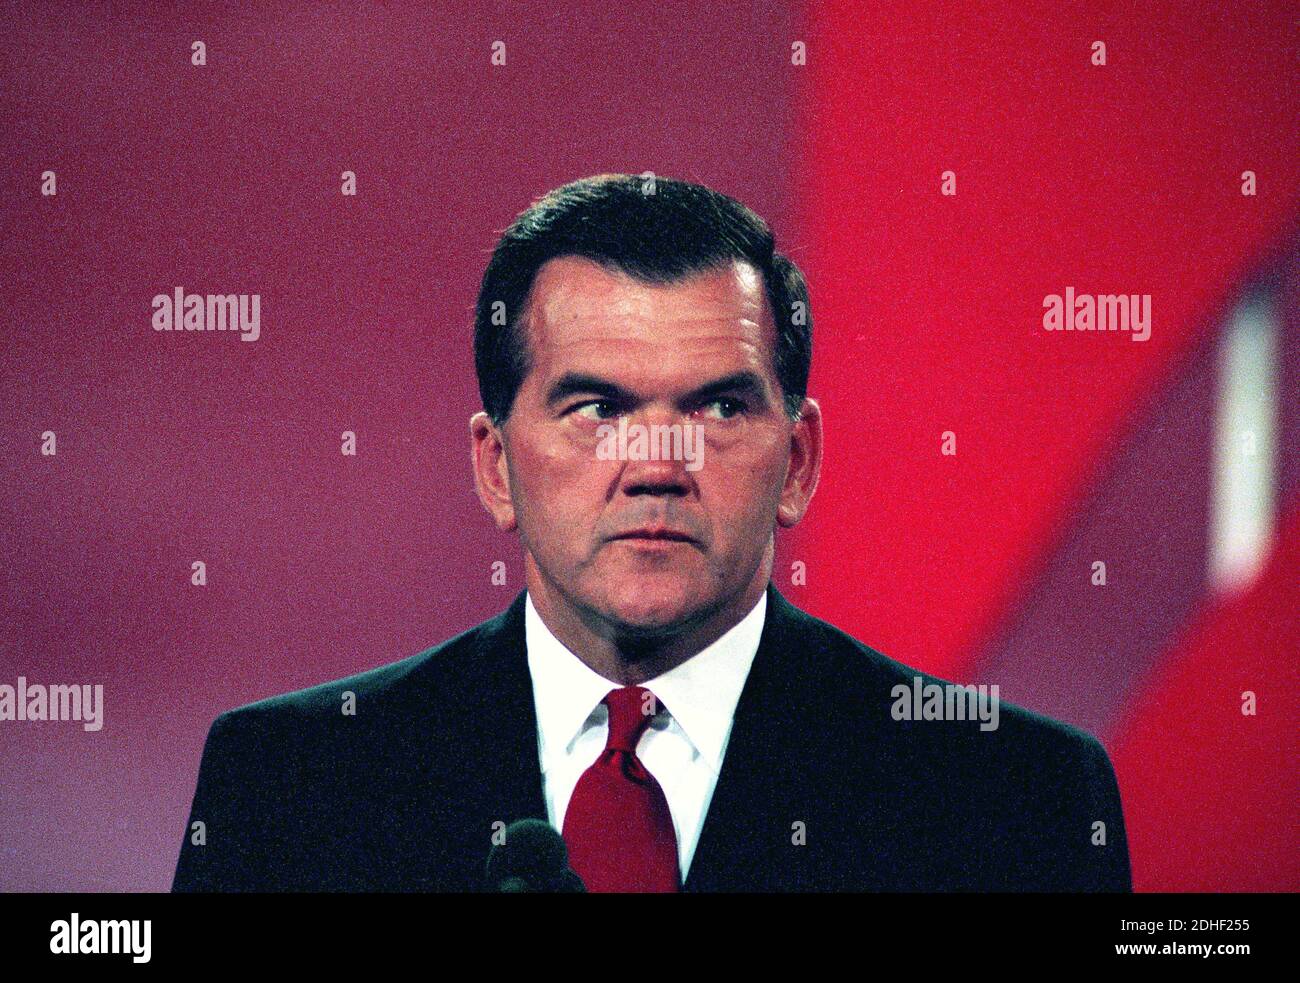 Governor Tom Ridge (Republican of Pennsylvania) speaks at the 1996 Republican National Convention at the San Diego Convention Center in San Diego, California on August 14, 1996. Photo by Ron Sachs / CNP/ABACAPRESS.COM Stock Photo